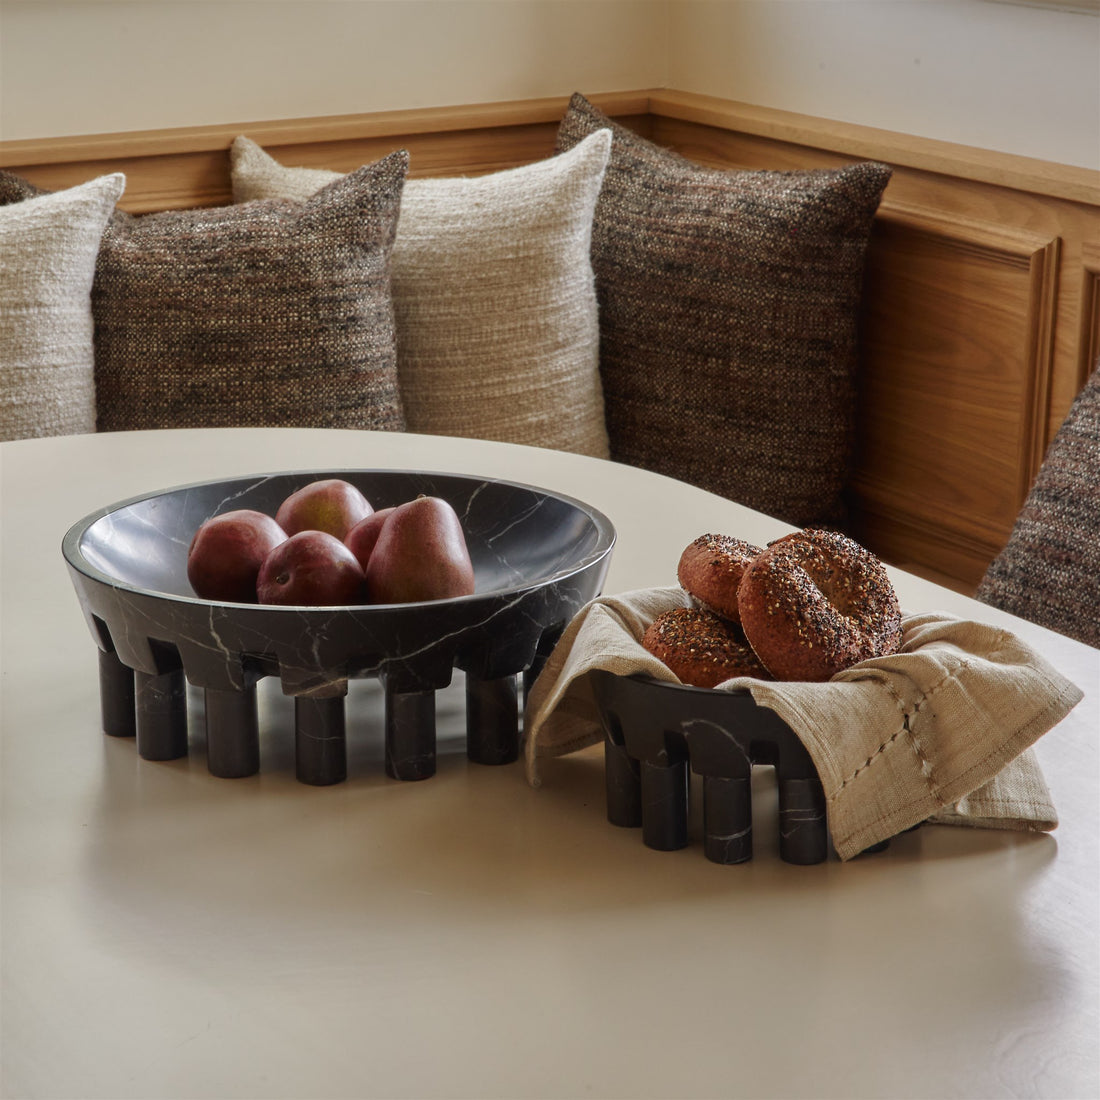 Two bowls made from black marble in a breakfast nook holding fresh bagels and apples.